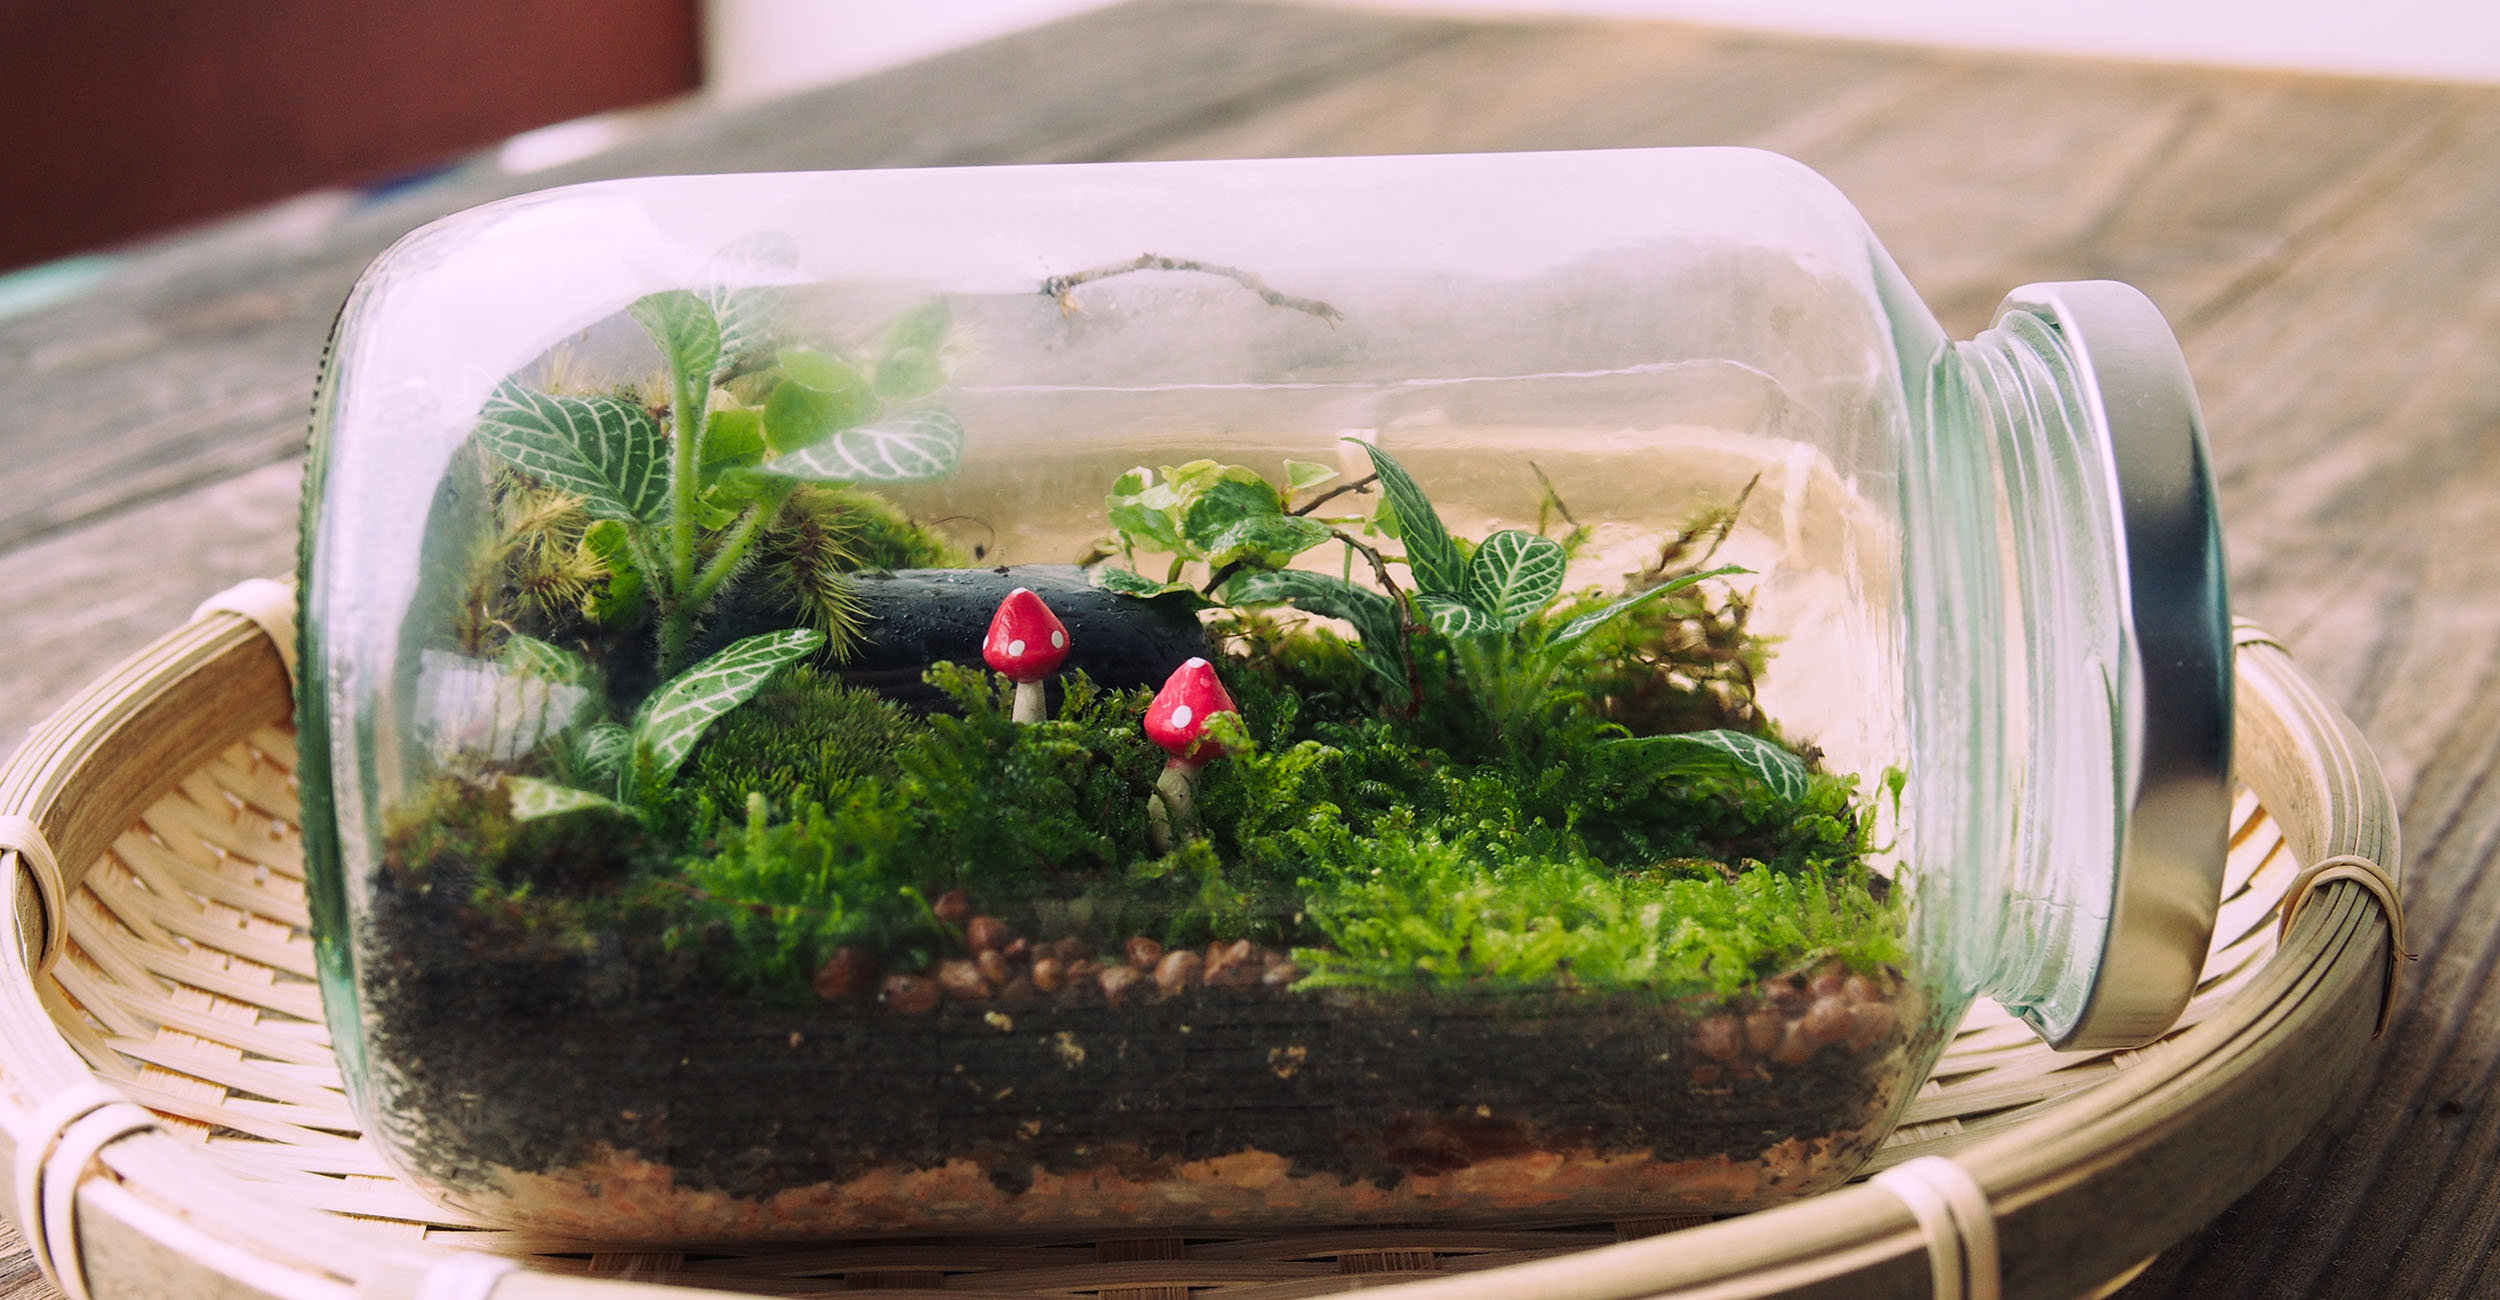 Terrariums Can Introduce a New Generation to Gardening